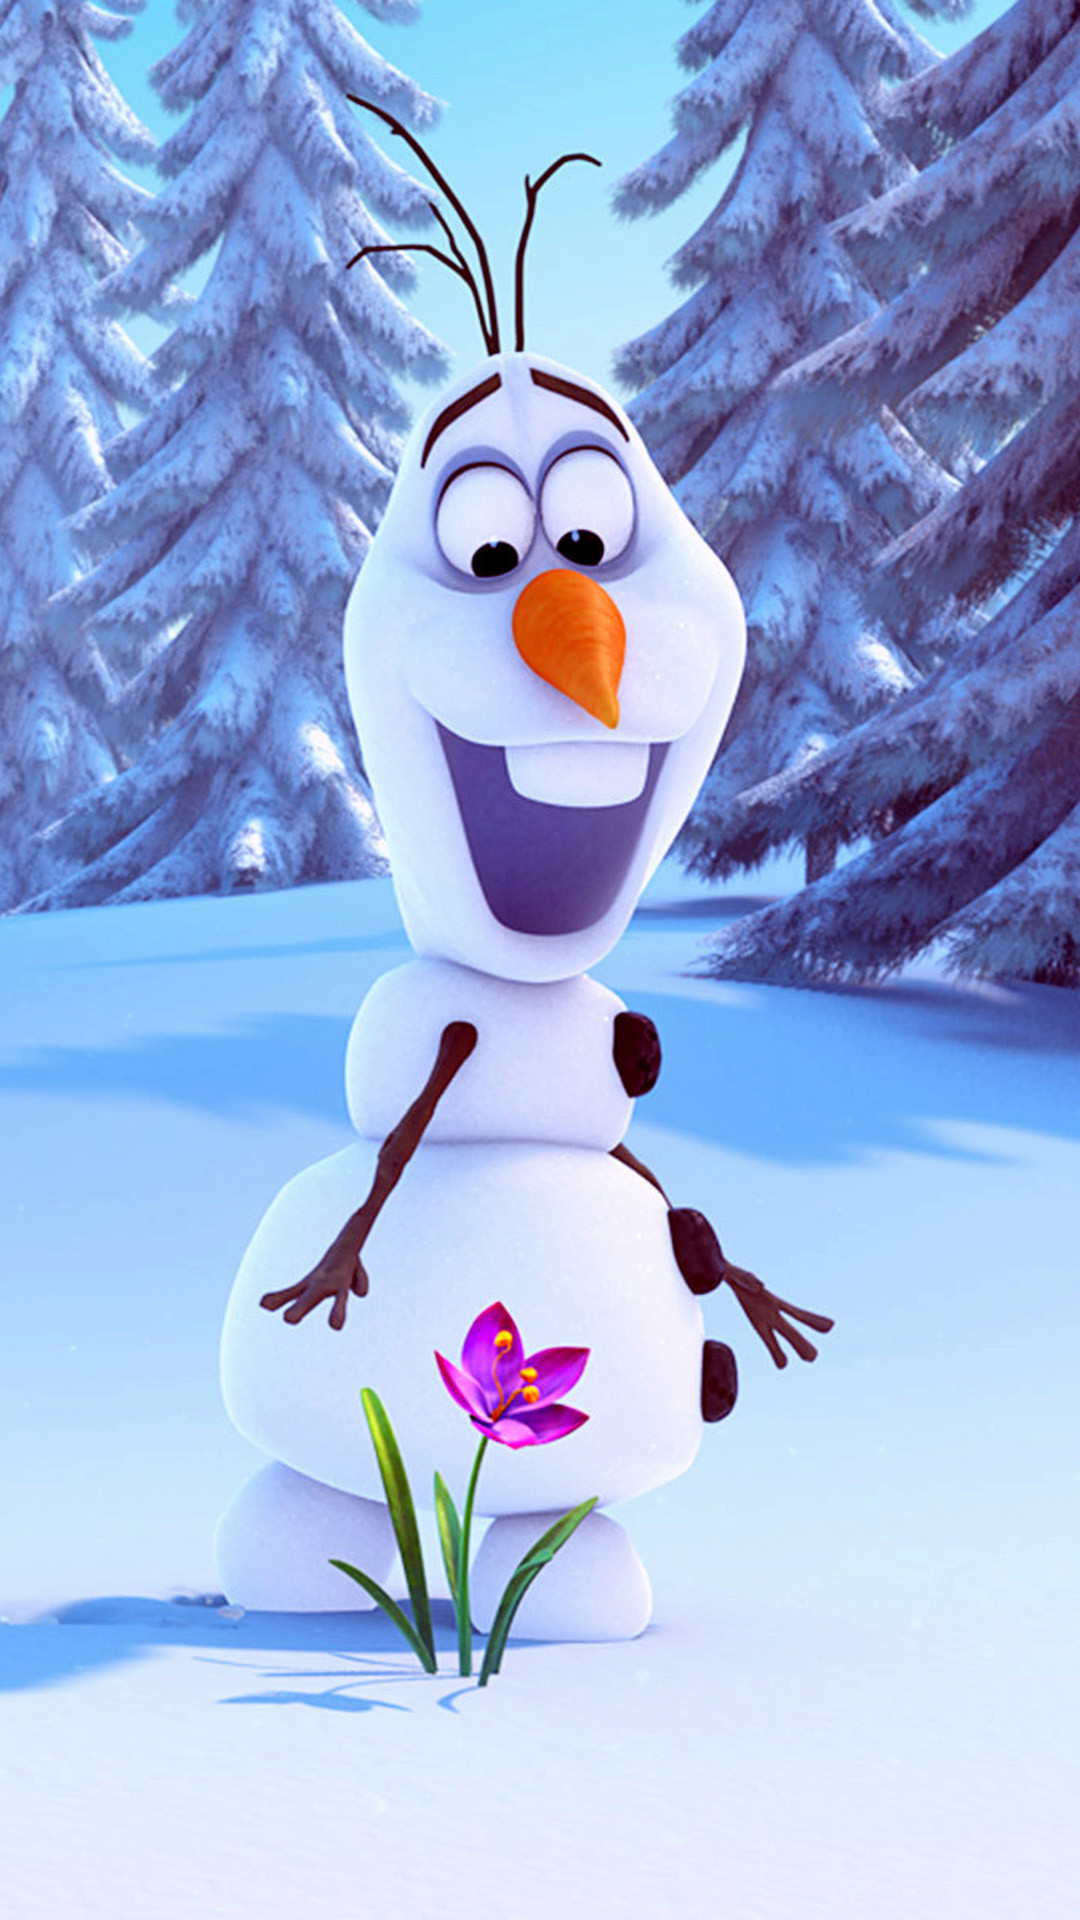 1080x1920 2560x1440 funny snowman wallpaper windows 10 backgrounds amazing colourful  quality images computer wallpapers best colours artwork 2560Ã—1440 Wallpaper  HD